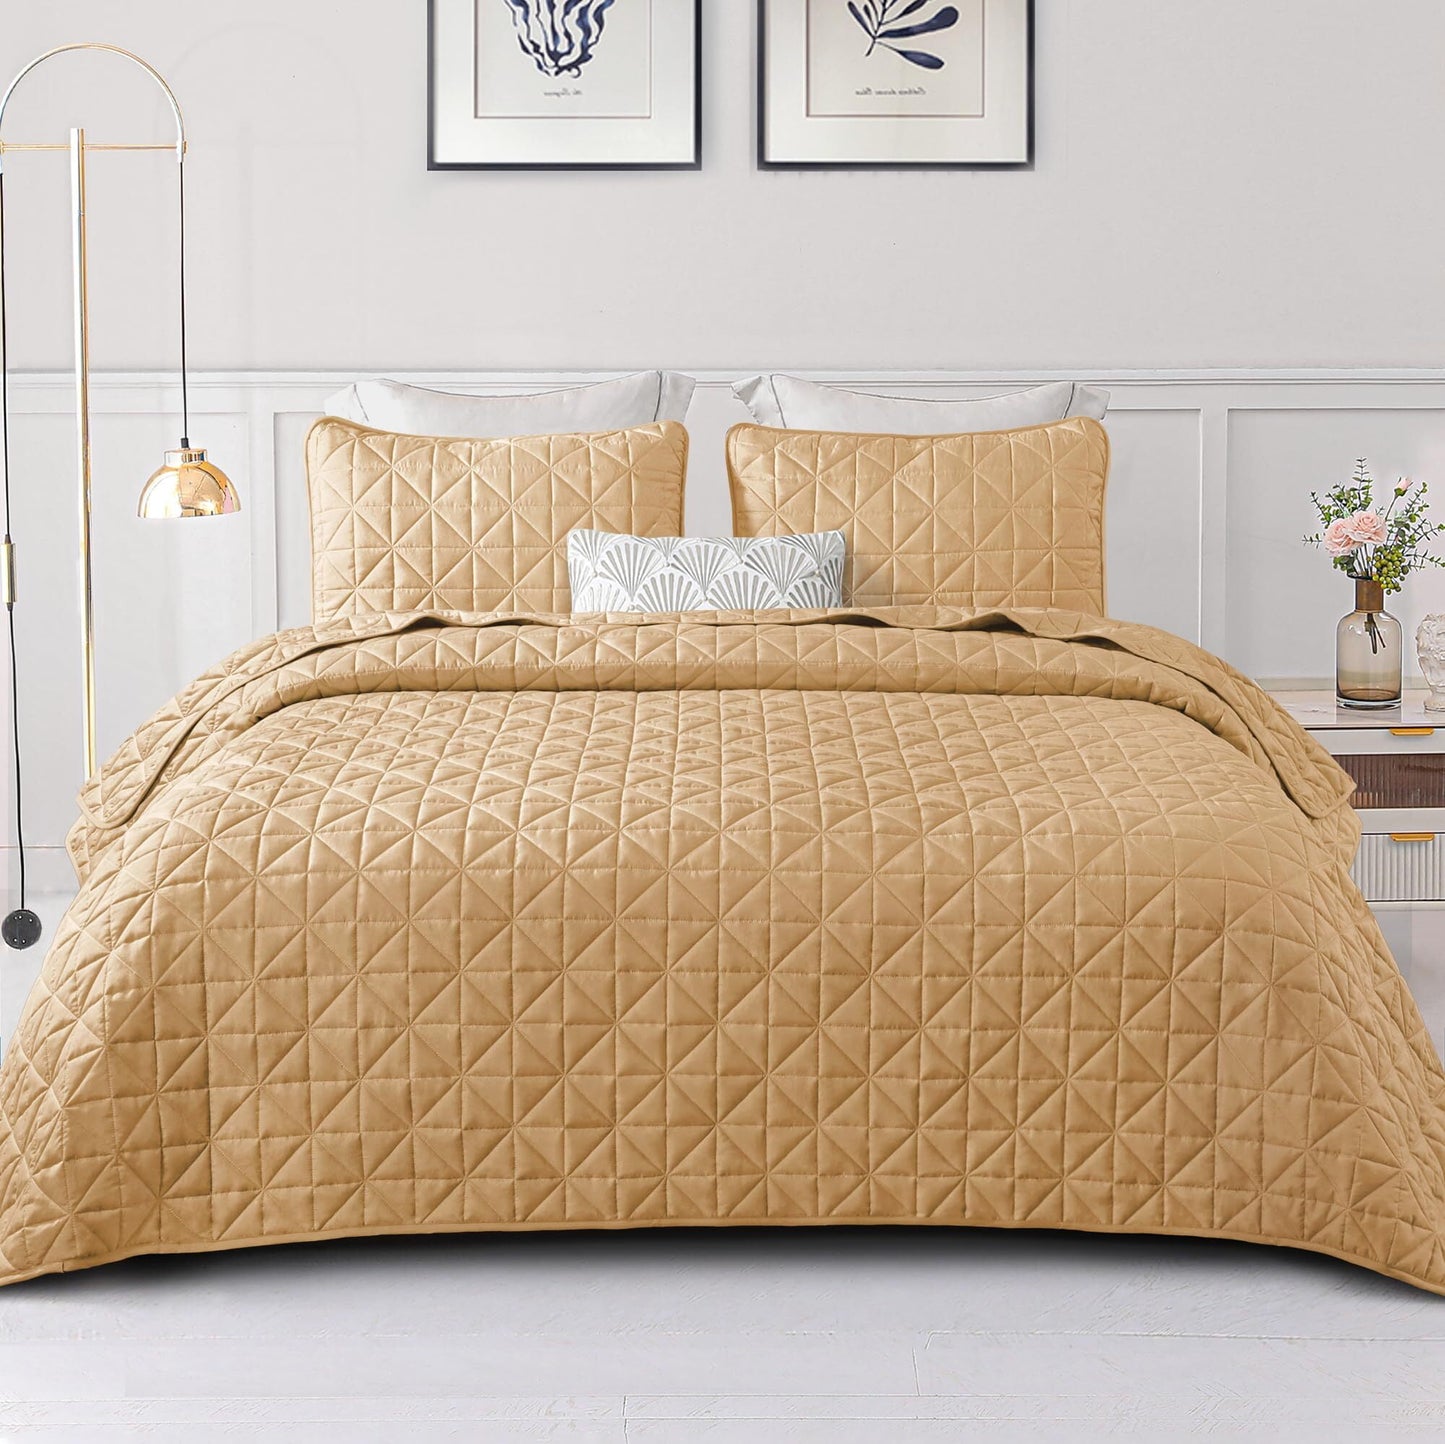 Exclusivo Mezcla King Size Quilt Bedding Set for All Seasons, Lightweight Soft Camel Quilts King Size Bedspreads Coverlets Bed Cover with Geometric Stitched Pattern, (1 Quilt, 2 Pillow Shams)